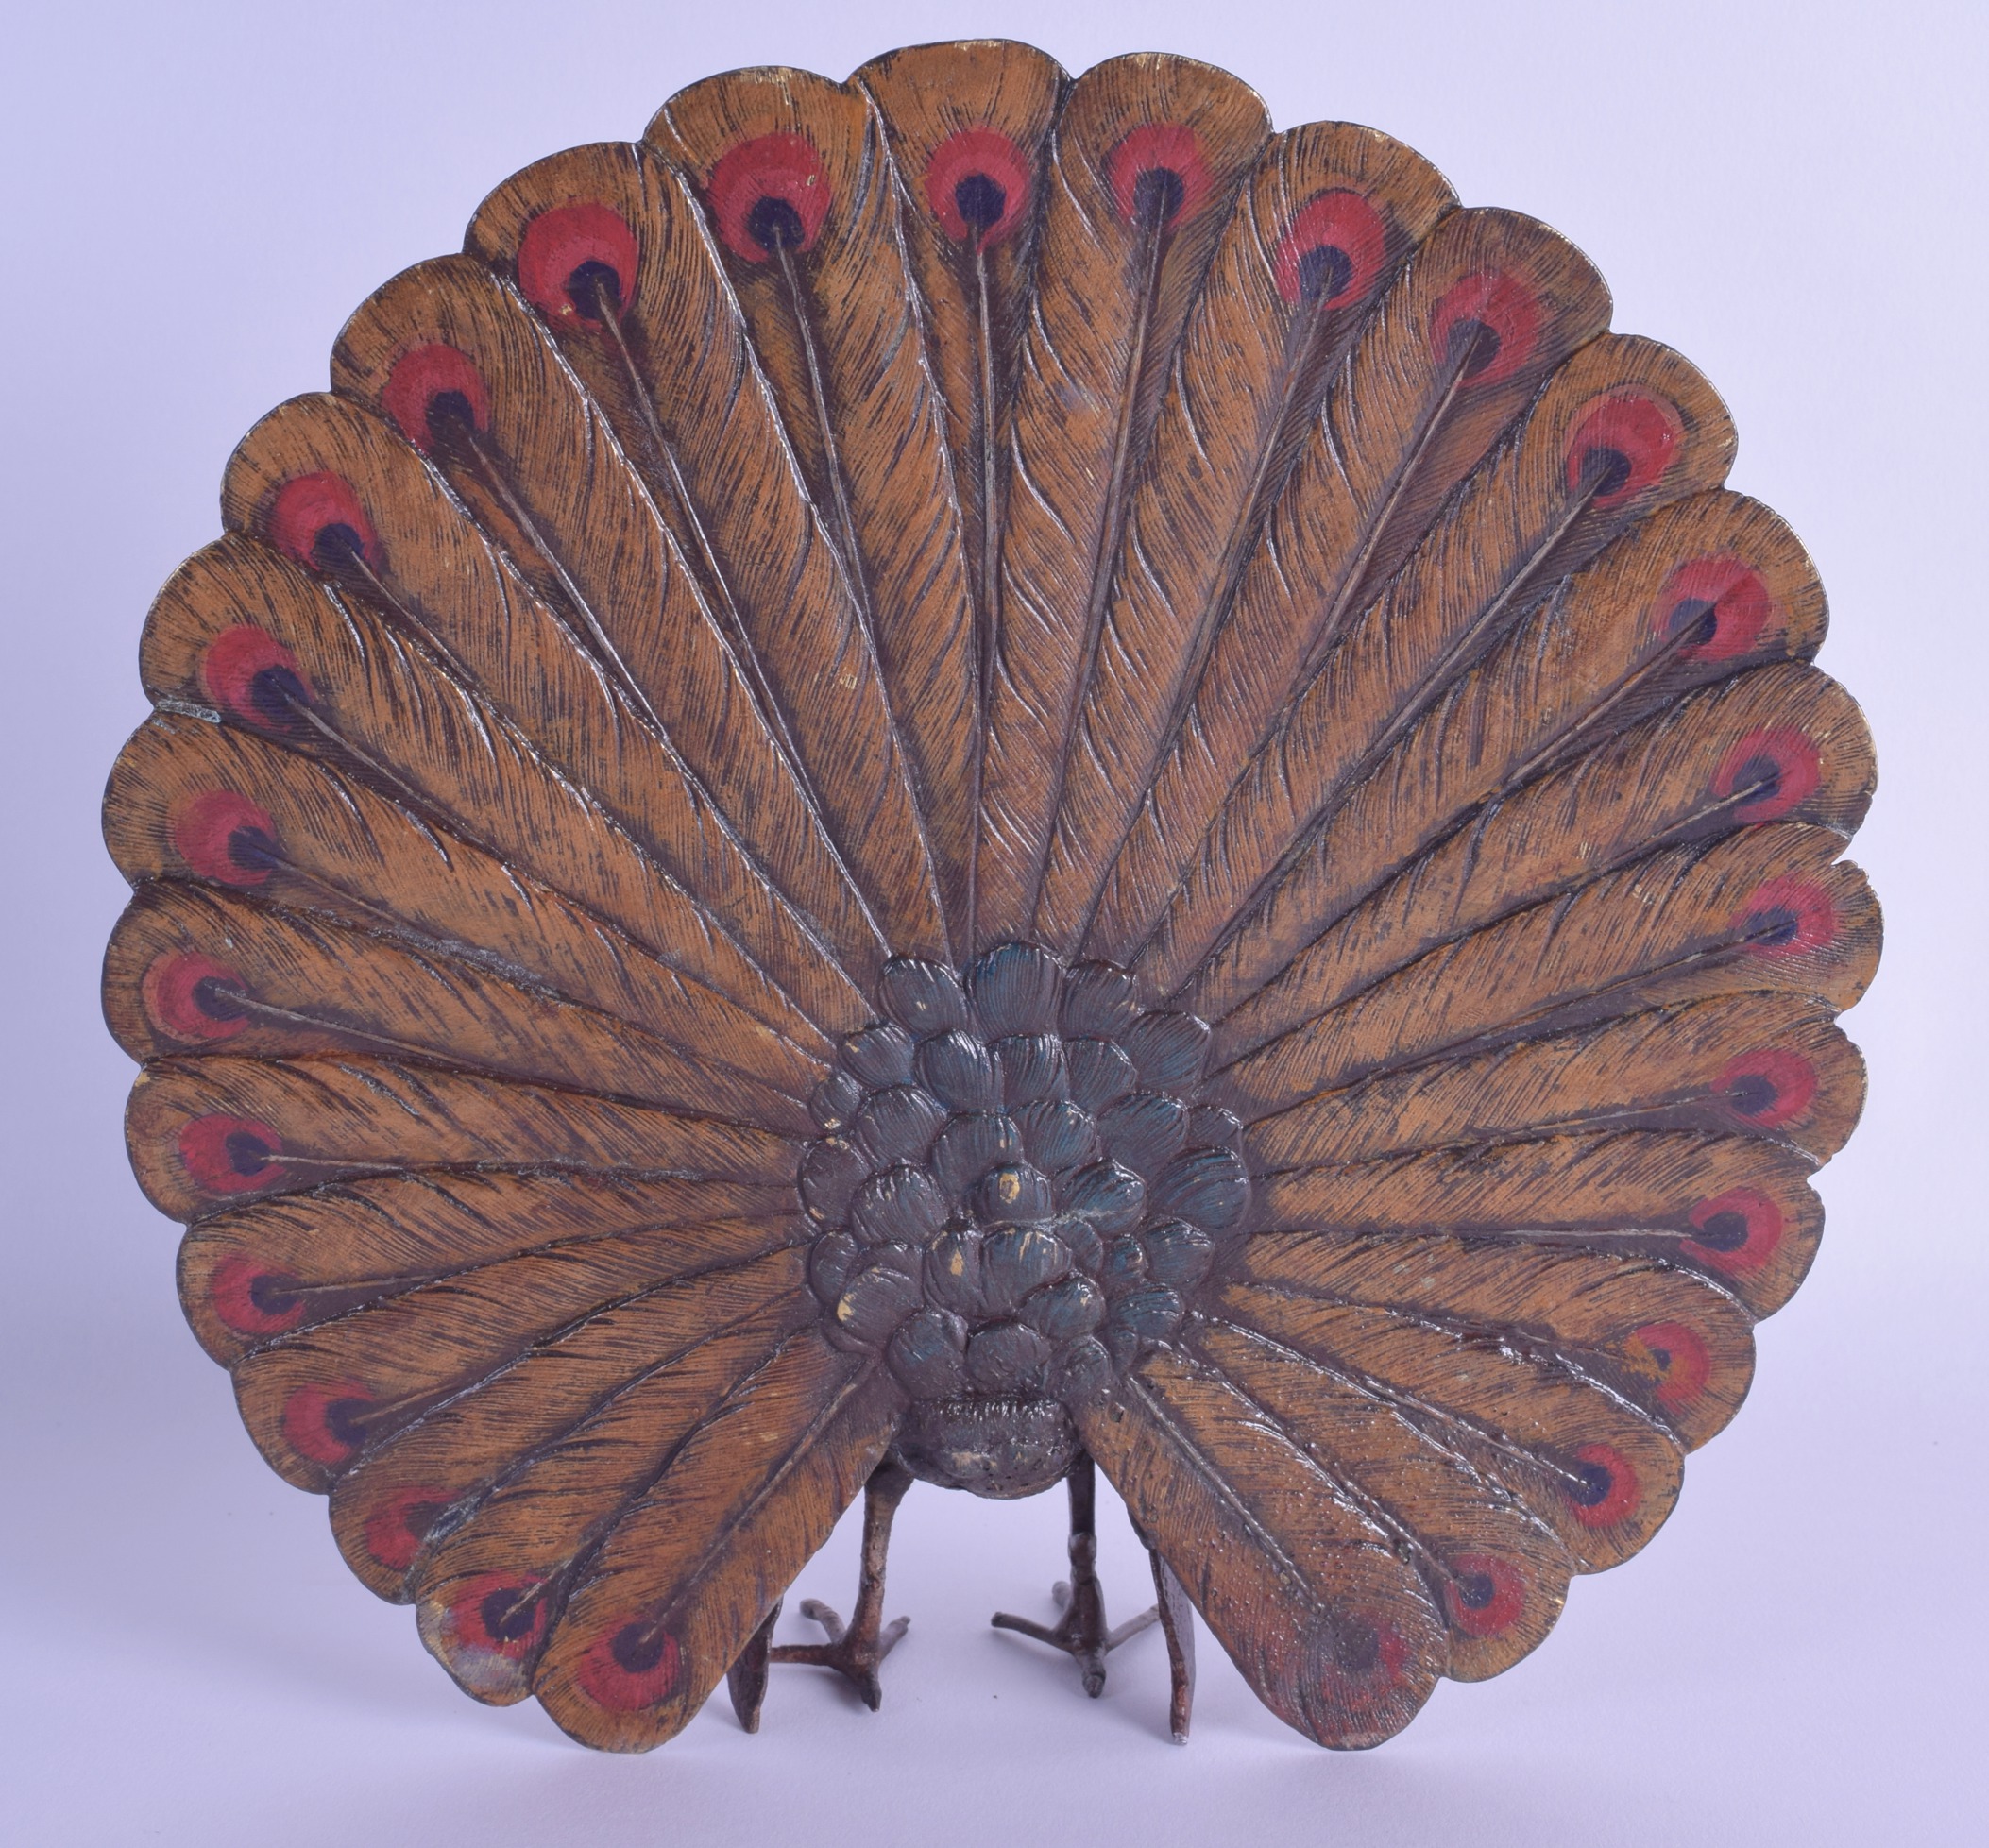 A LATE 19TH CENTURY AUSTRIAN COLD PAINTED BRONZE FIGURE OF A PEACOCK modelled standing with plumes - Image 2 of 2